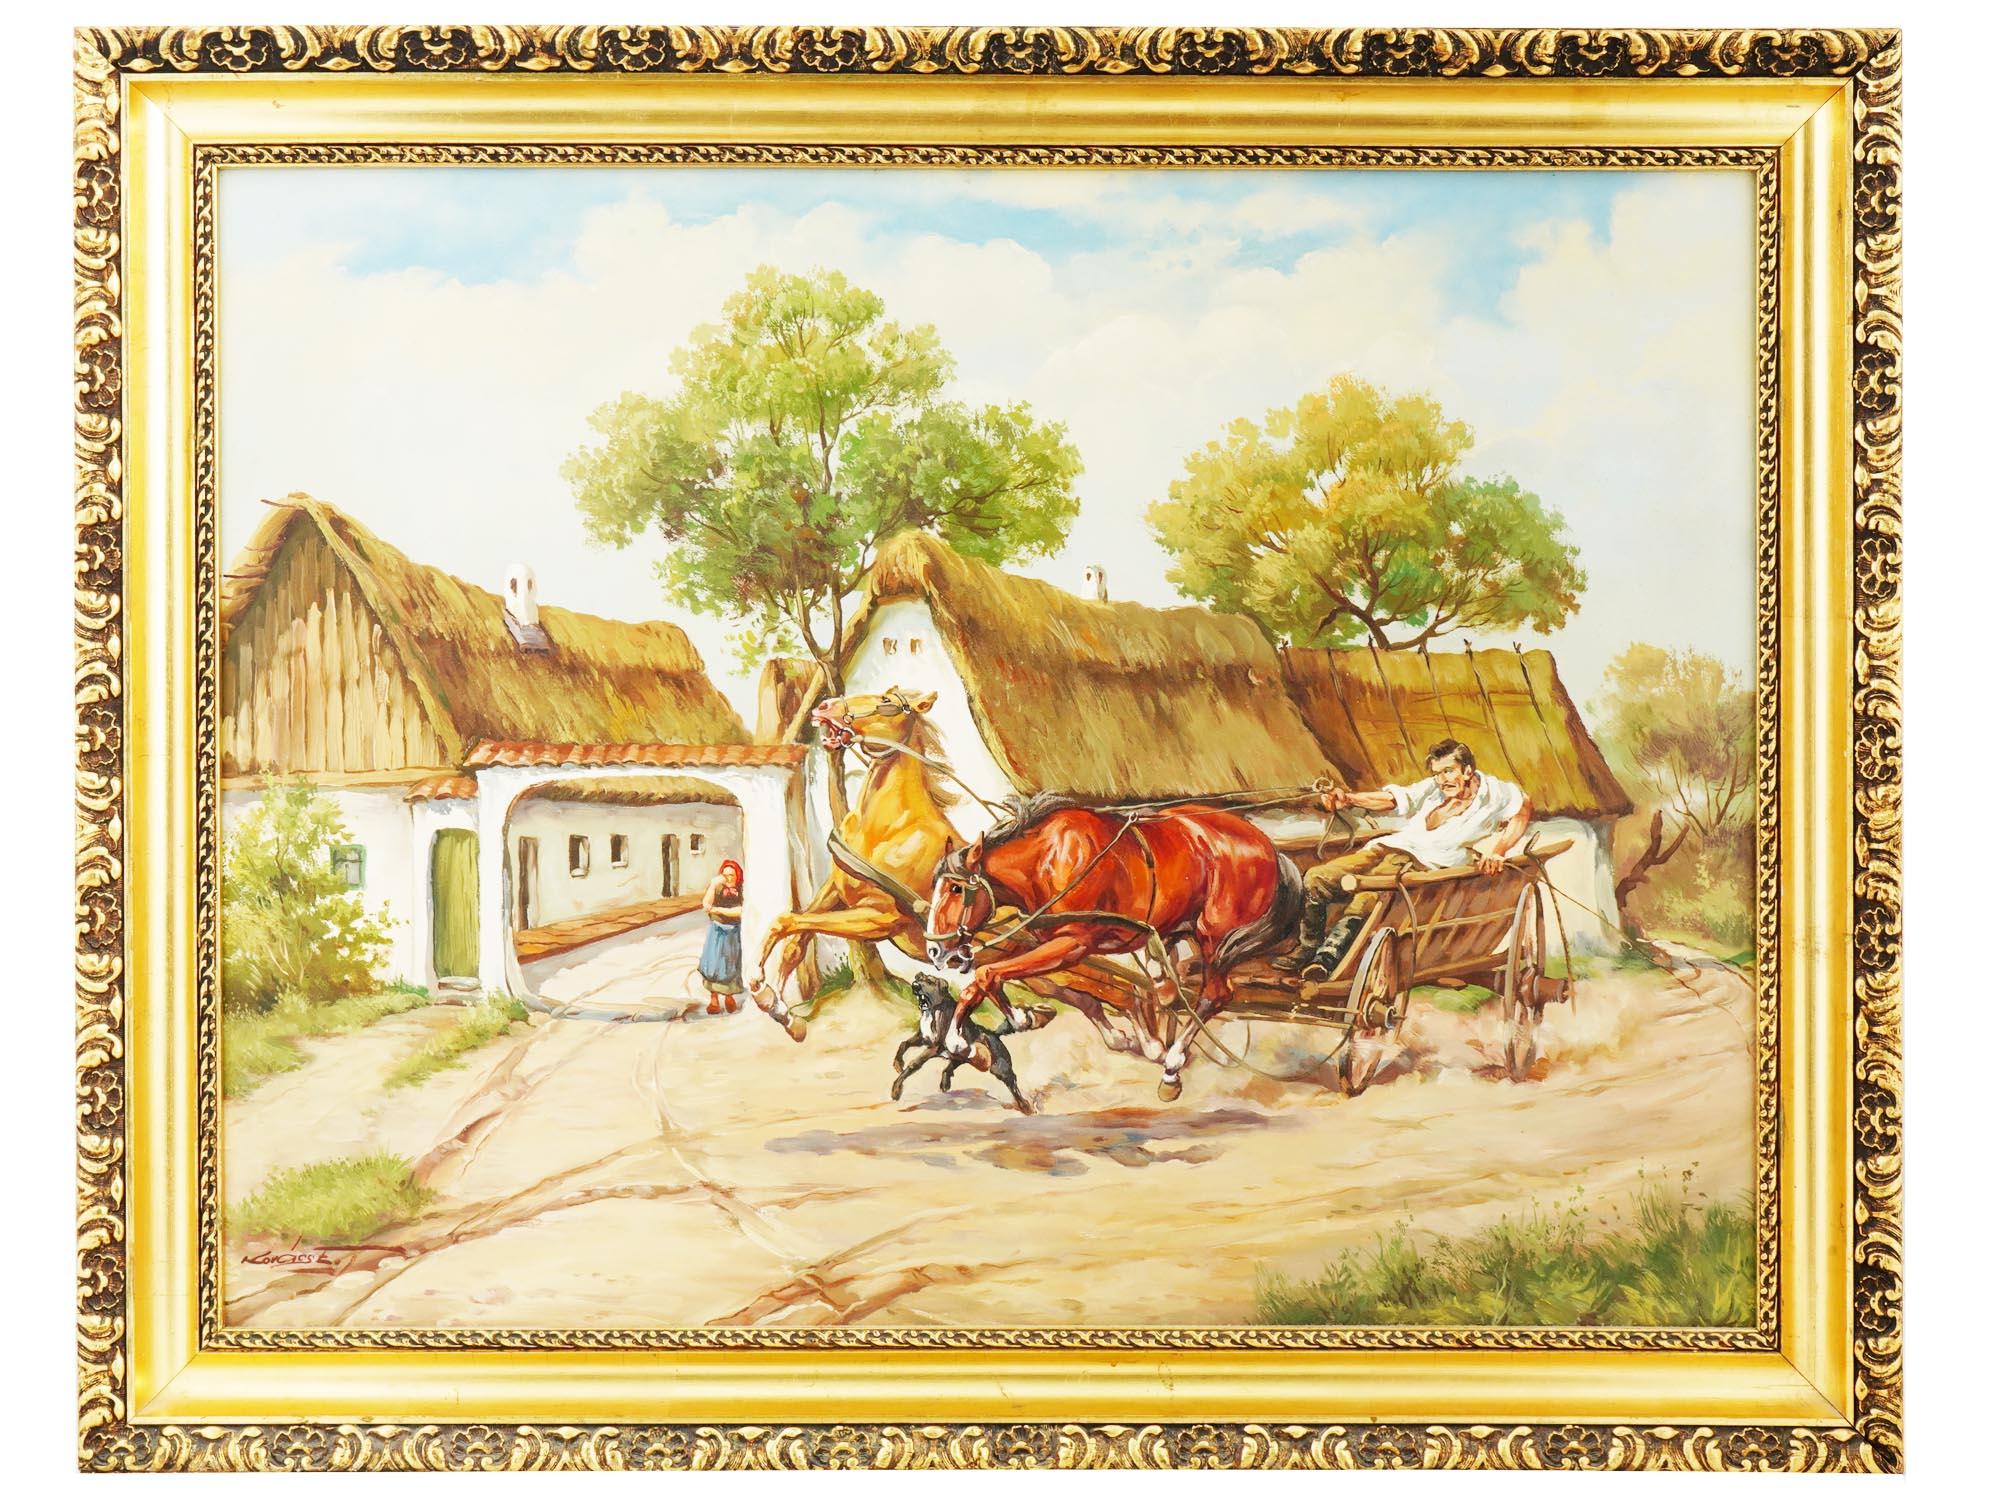 HUNGARIAN RURAL SCENE HORSE PAINTING BY ELEMER KOVACS PIC-0